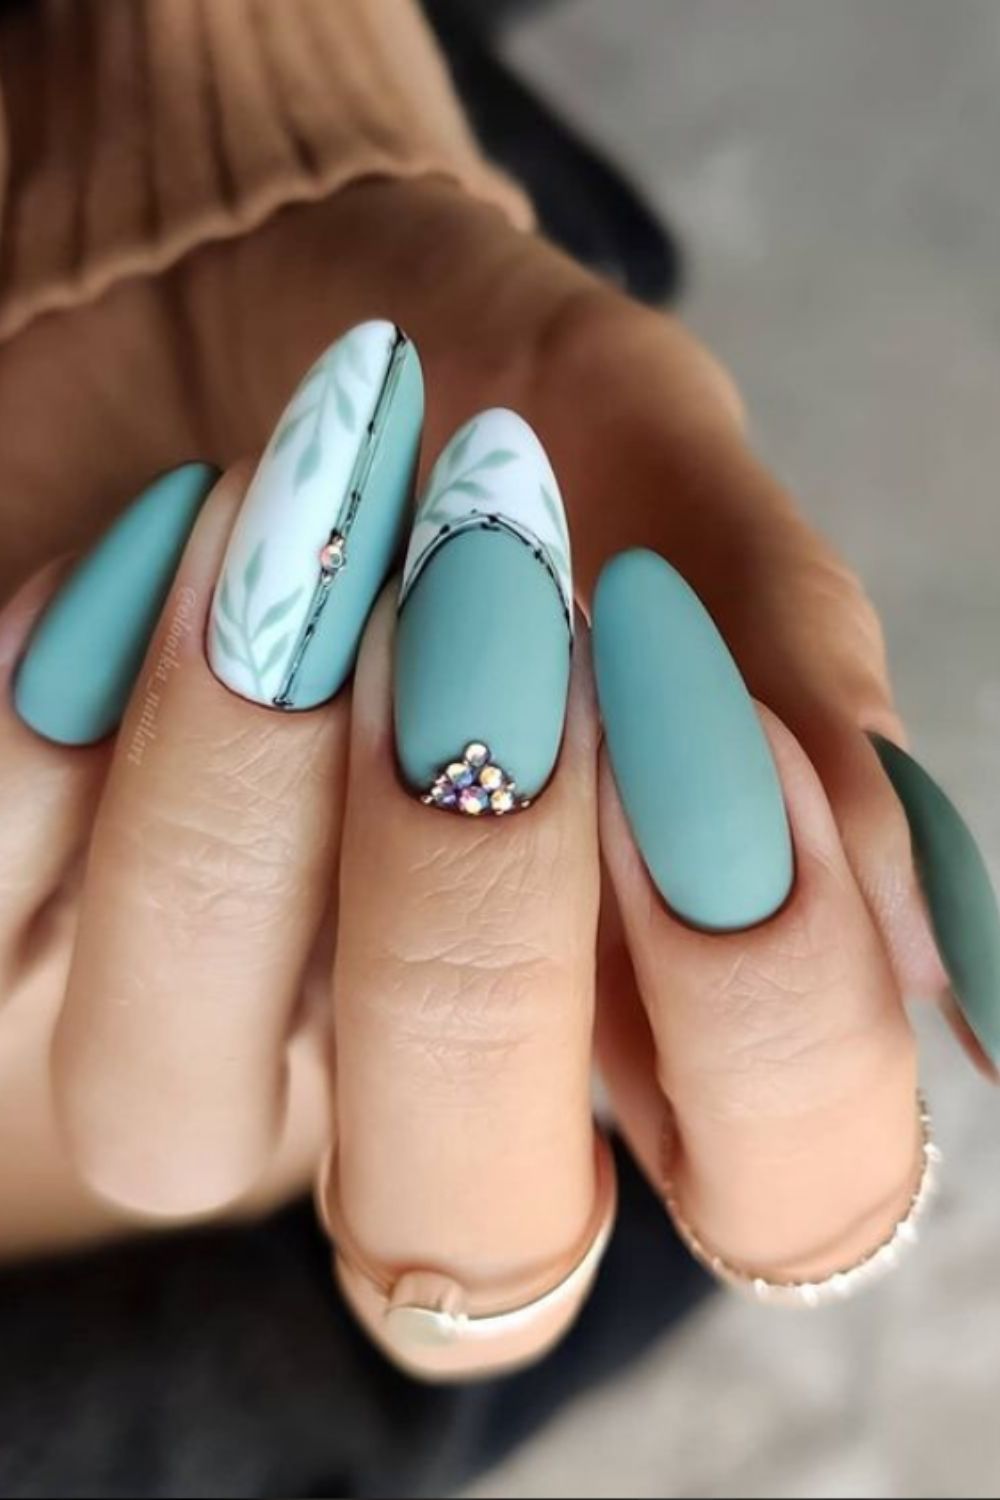 White and light blue nails